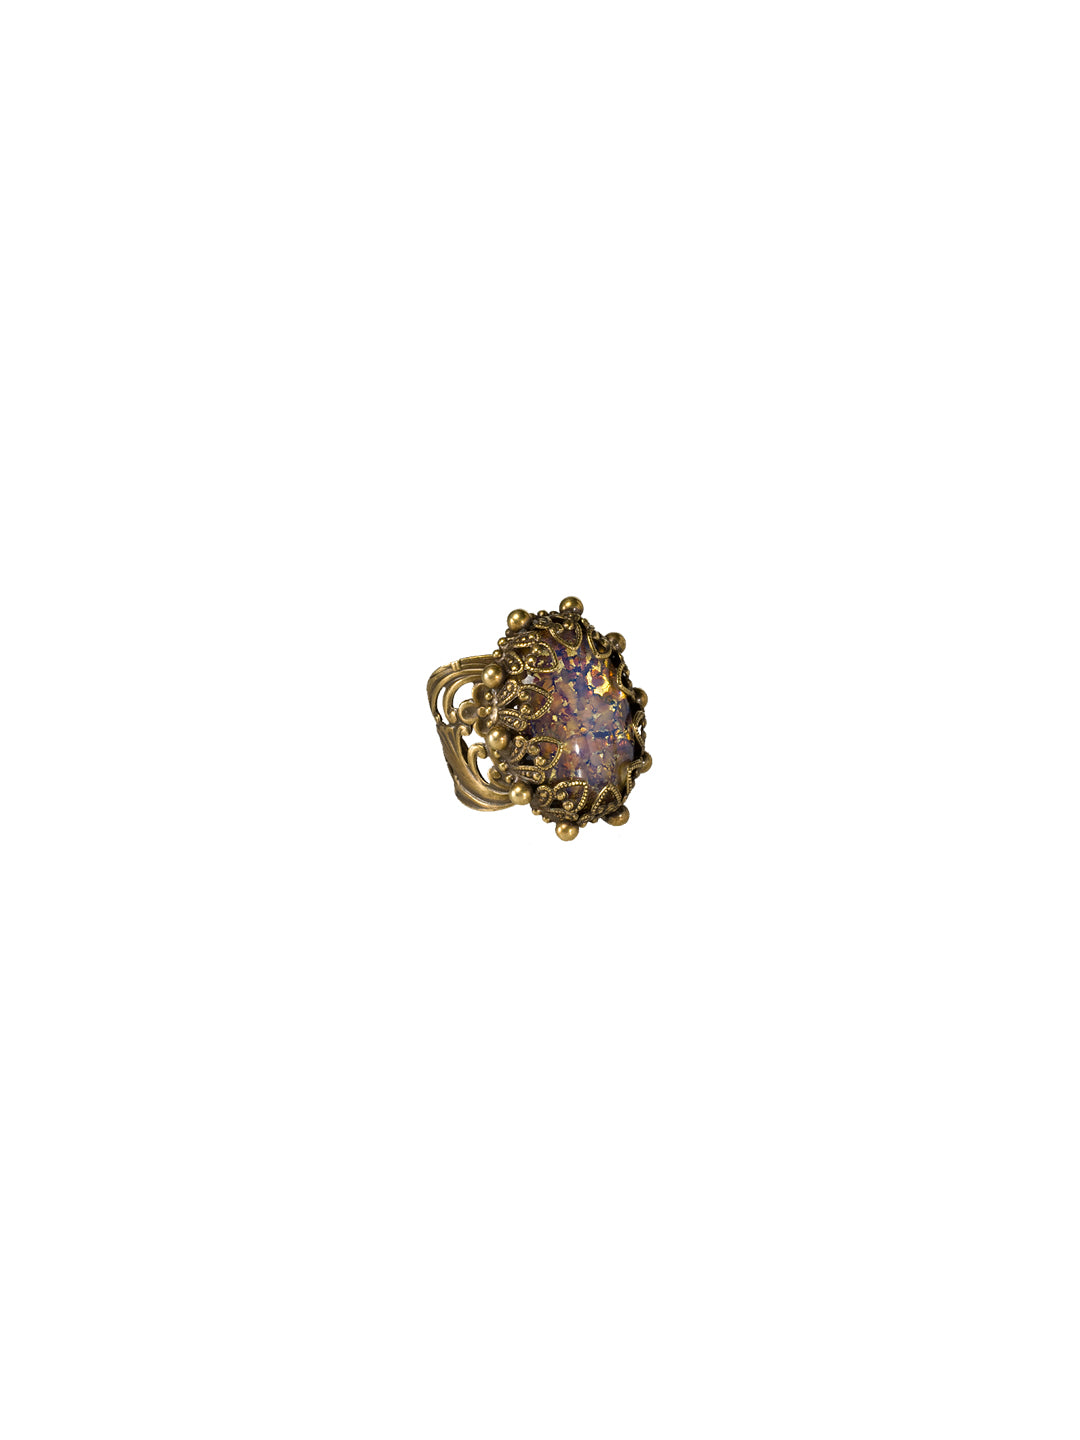 Royalty Oval Ring - RCF55AGWL - <p>A look that is fit for royalty. A large oval cabochon sits in the center of this ring and is secured in place by an antique inspired rope weave cage, reminiscent of heart shapes. The piece is raised by antique fleurs and surrounded by an embellished raised ball antique border. This ring is set on an adjustable openwork filigree band and is stylish enough for cocktails, or even meeting the queen. From Sorrelli's Water Lily collection in our Antique Gold-tone finish.</p>